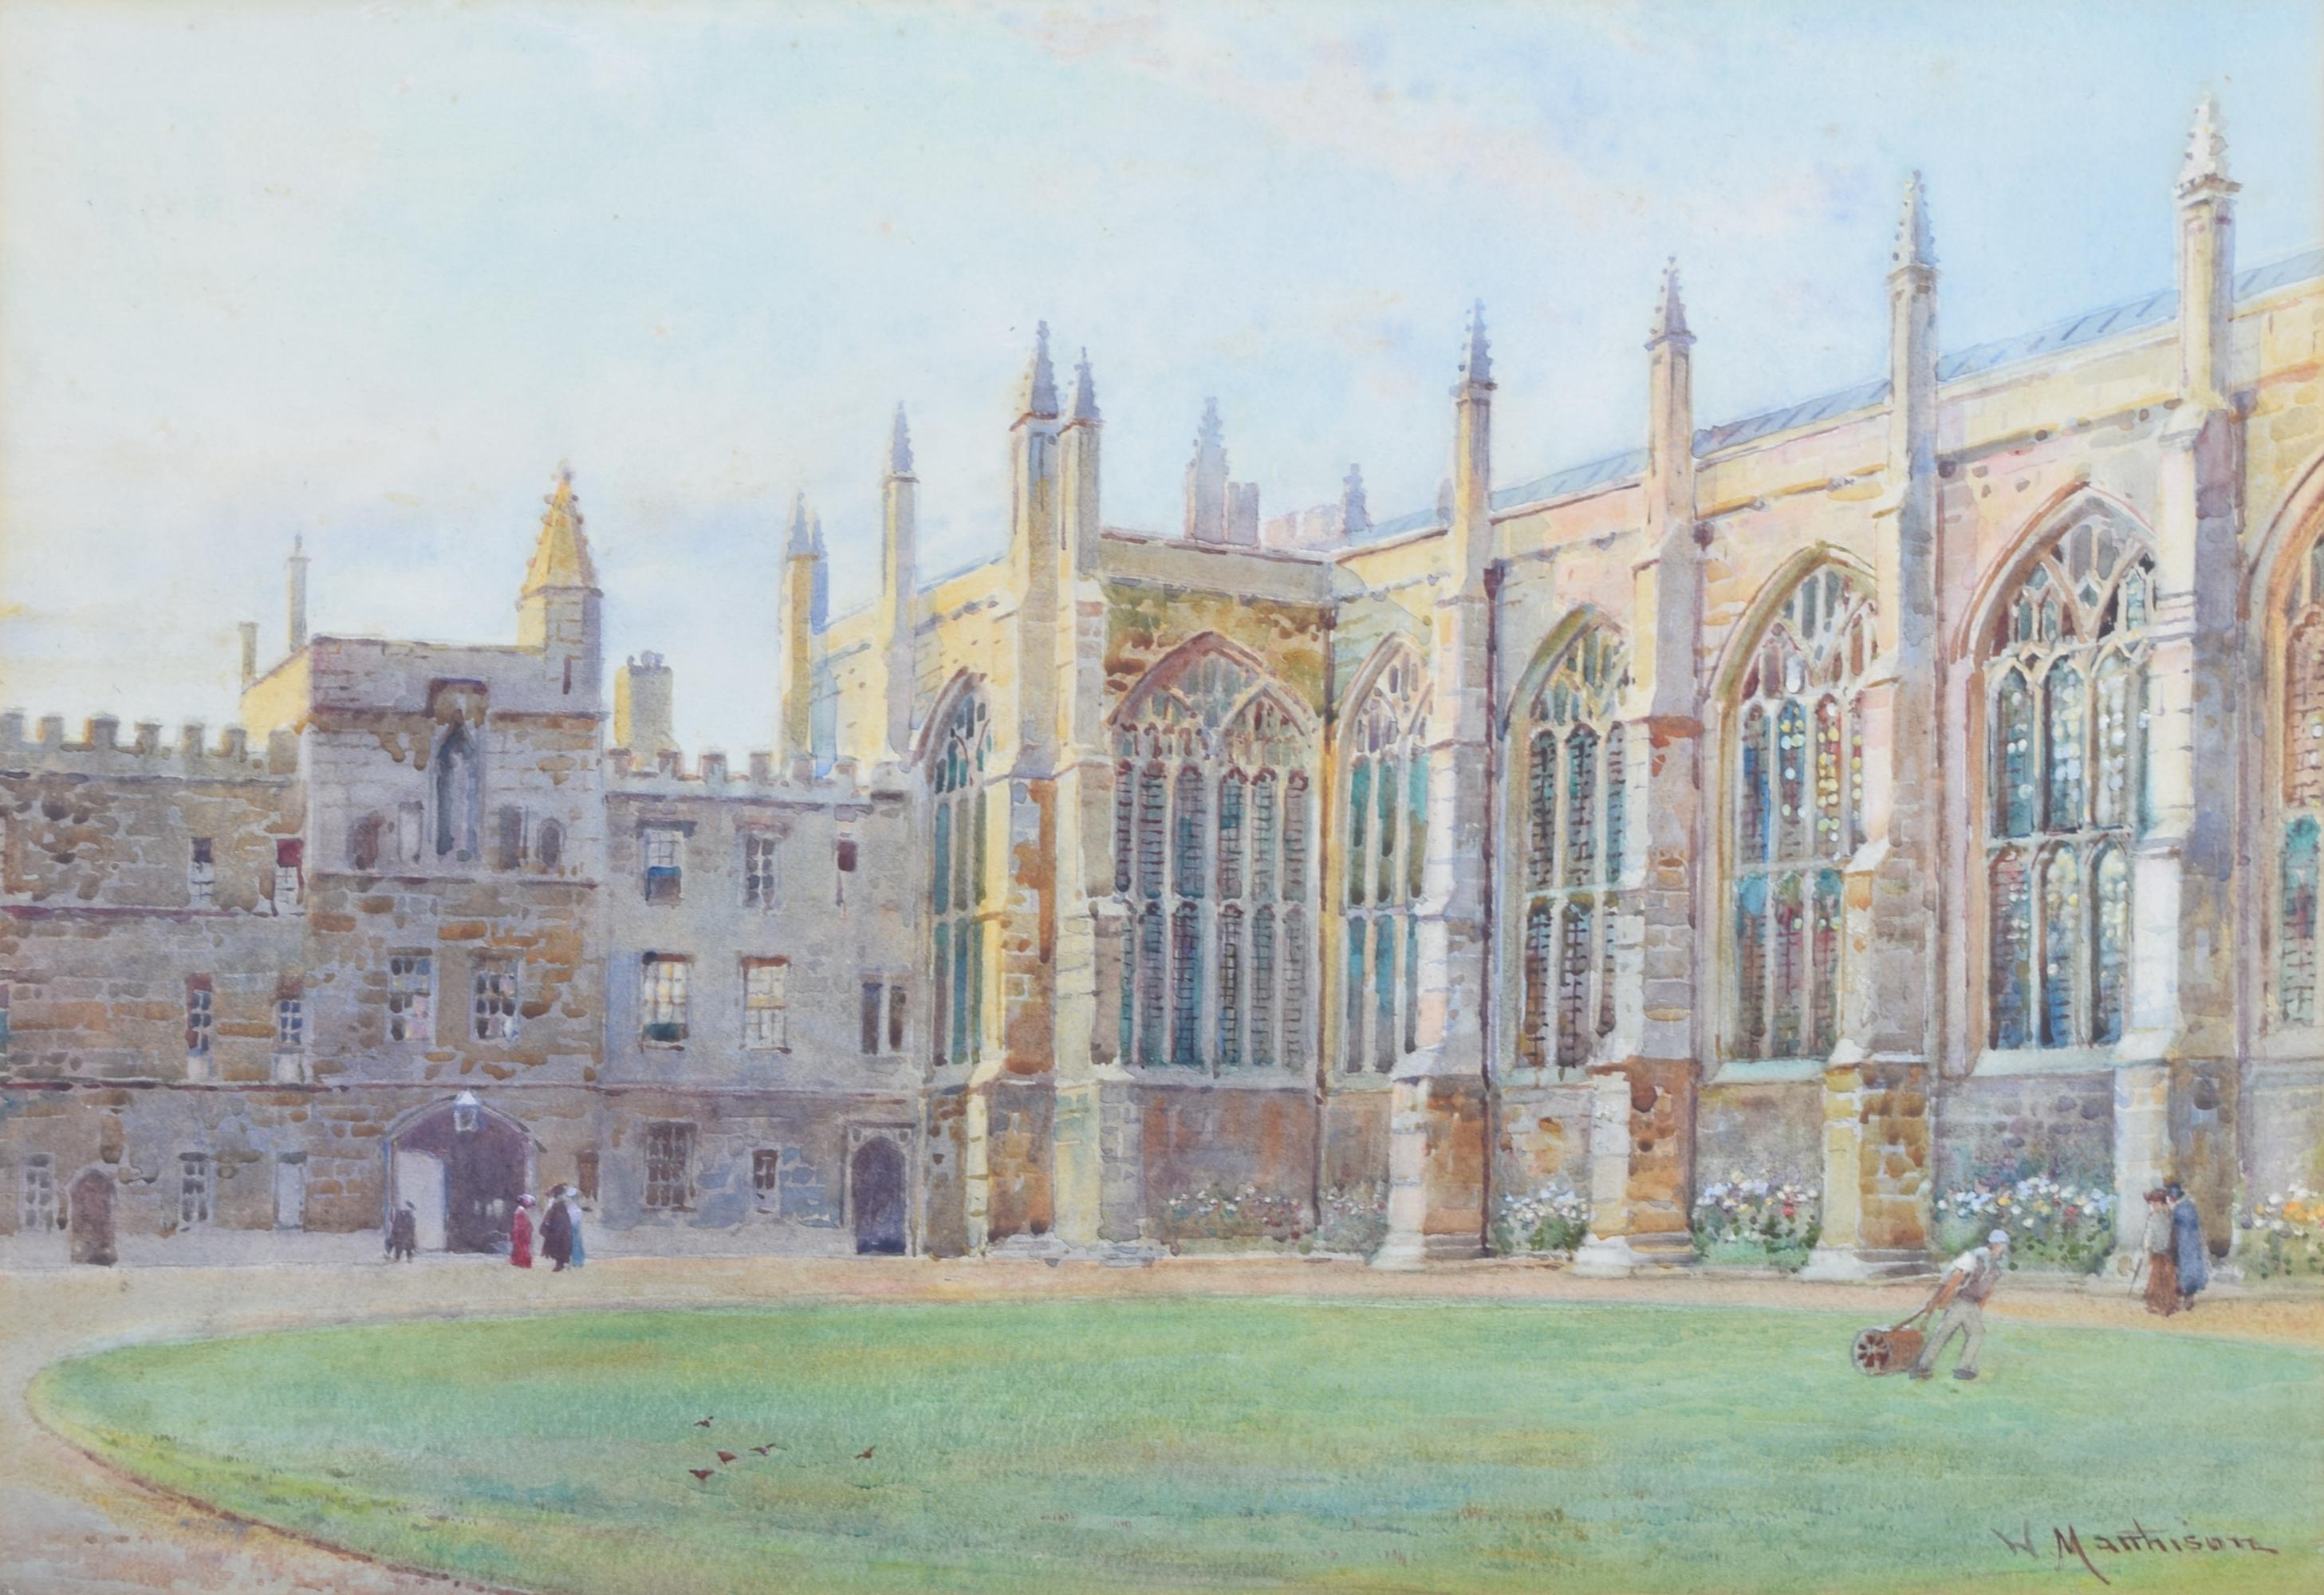 To see our other views of Oxford and Cambridge, scroll down to "More from this Seller" and below it click on "See all from this Seller" - or send us a message if you cannot find the view you want.

William Matthison (1853-1926)
New College, Oxford: